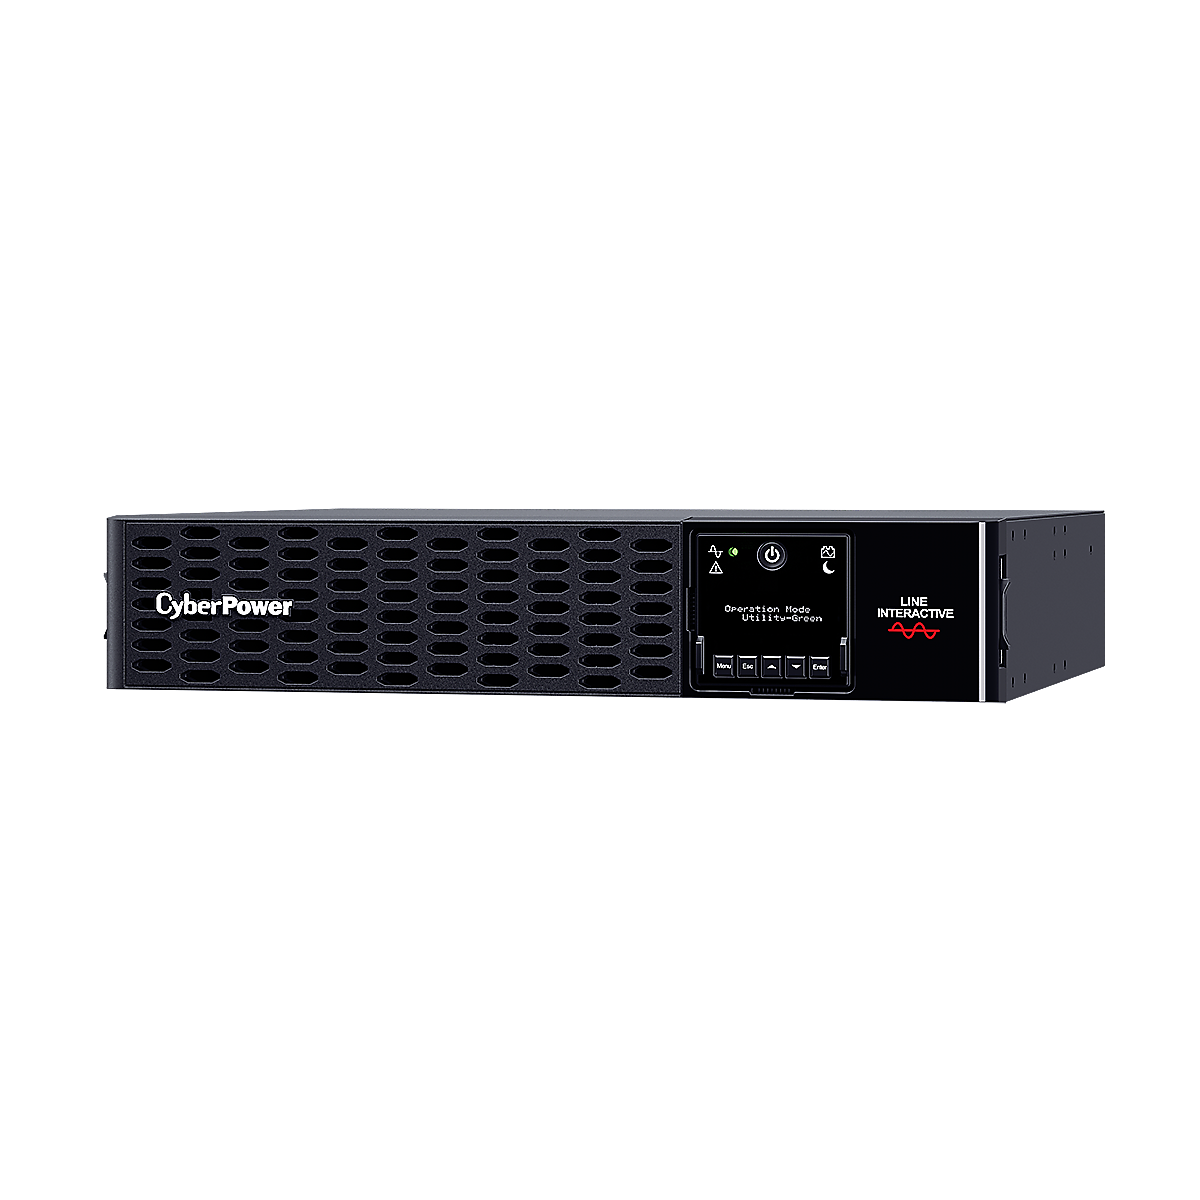 CyberPower Systems PRO Series 1500VA Rack Mount UPS with LCD 2U